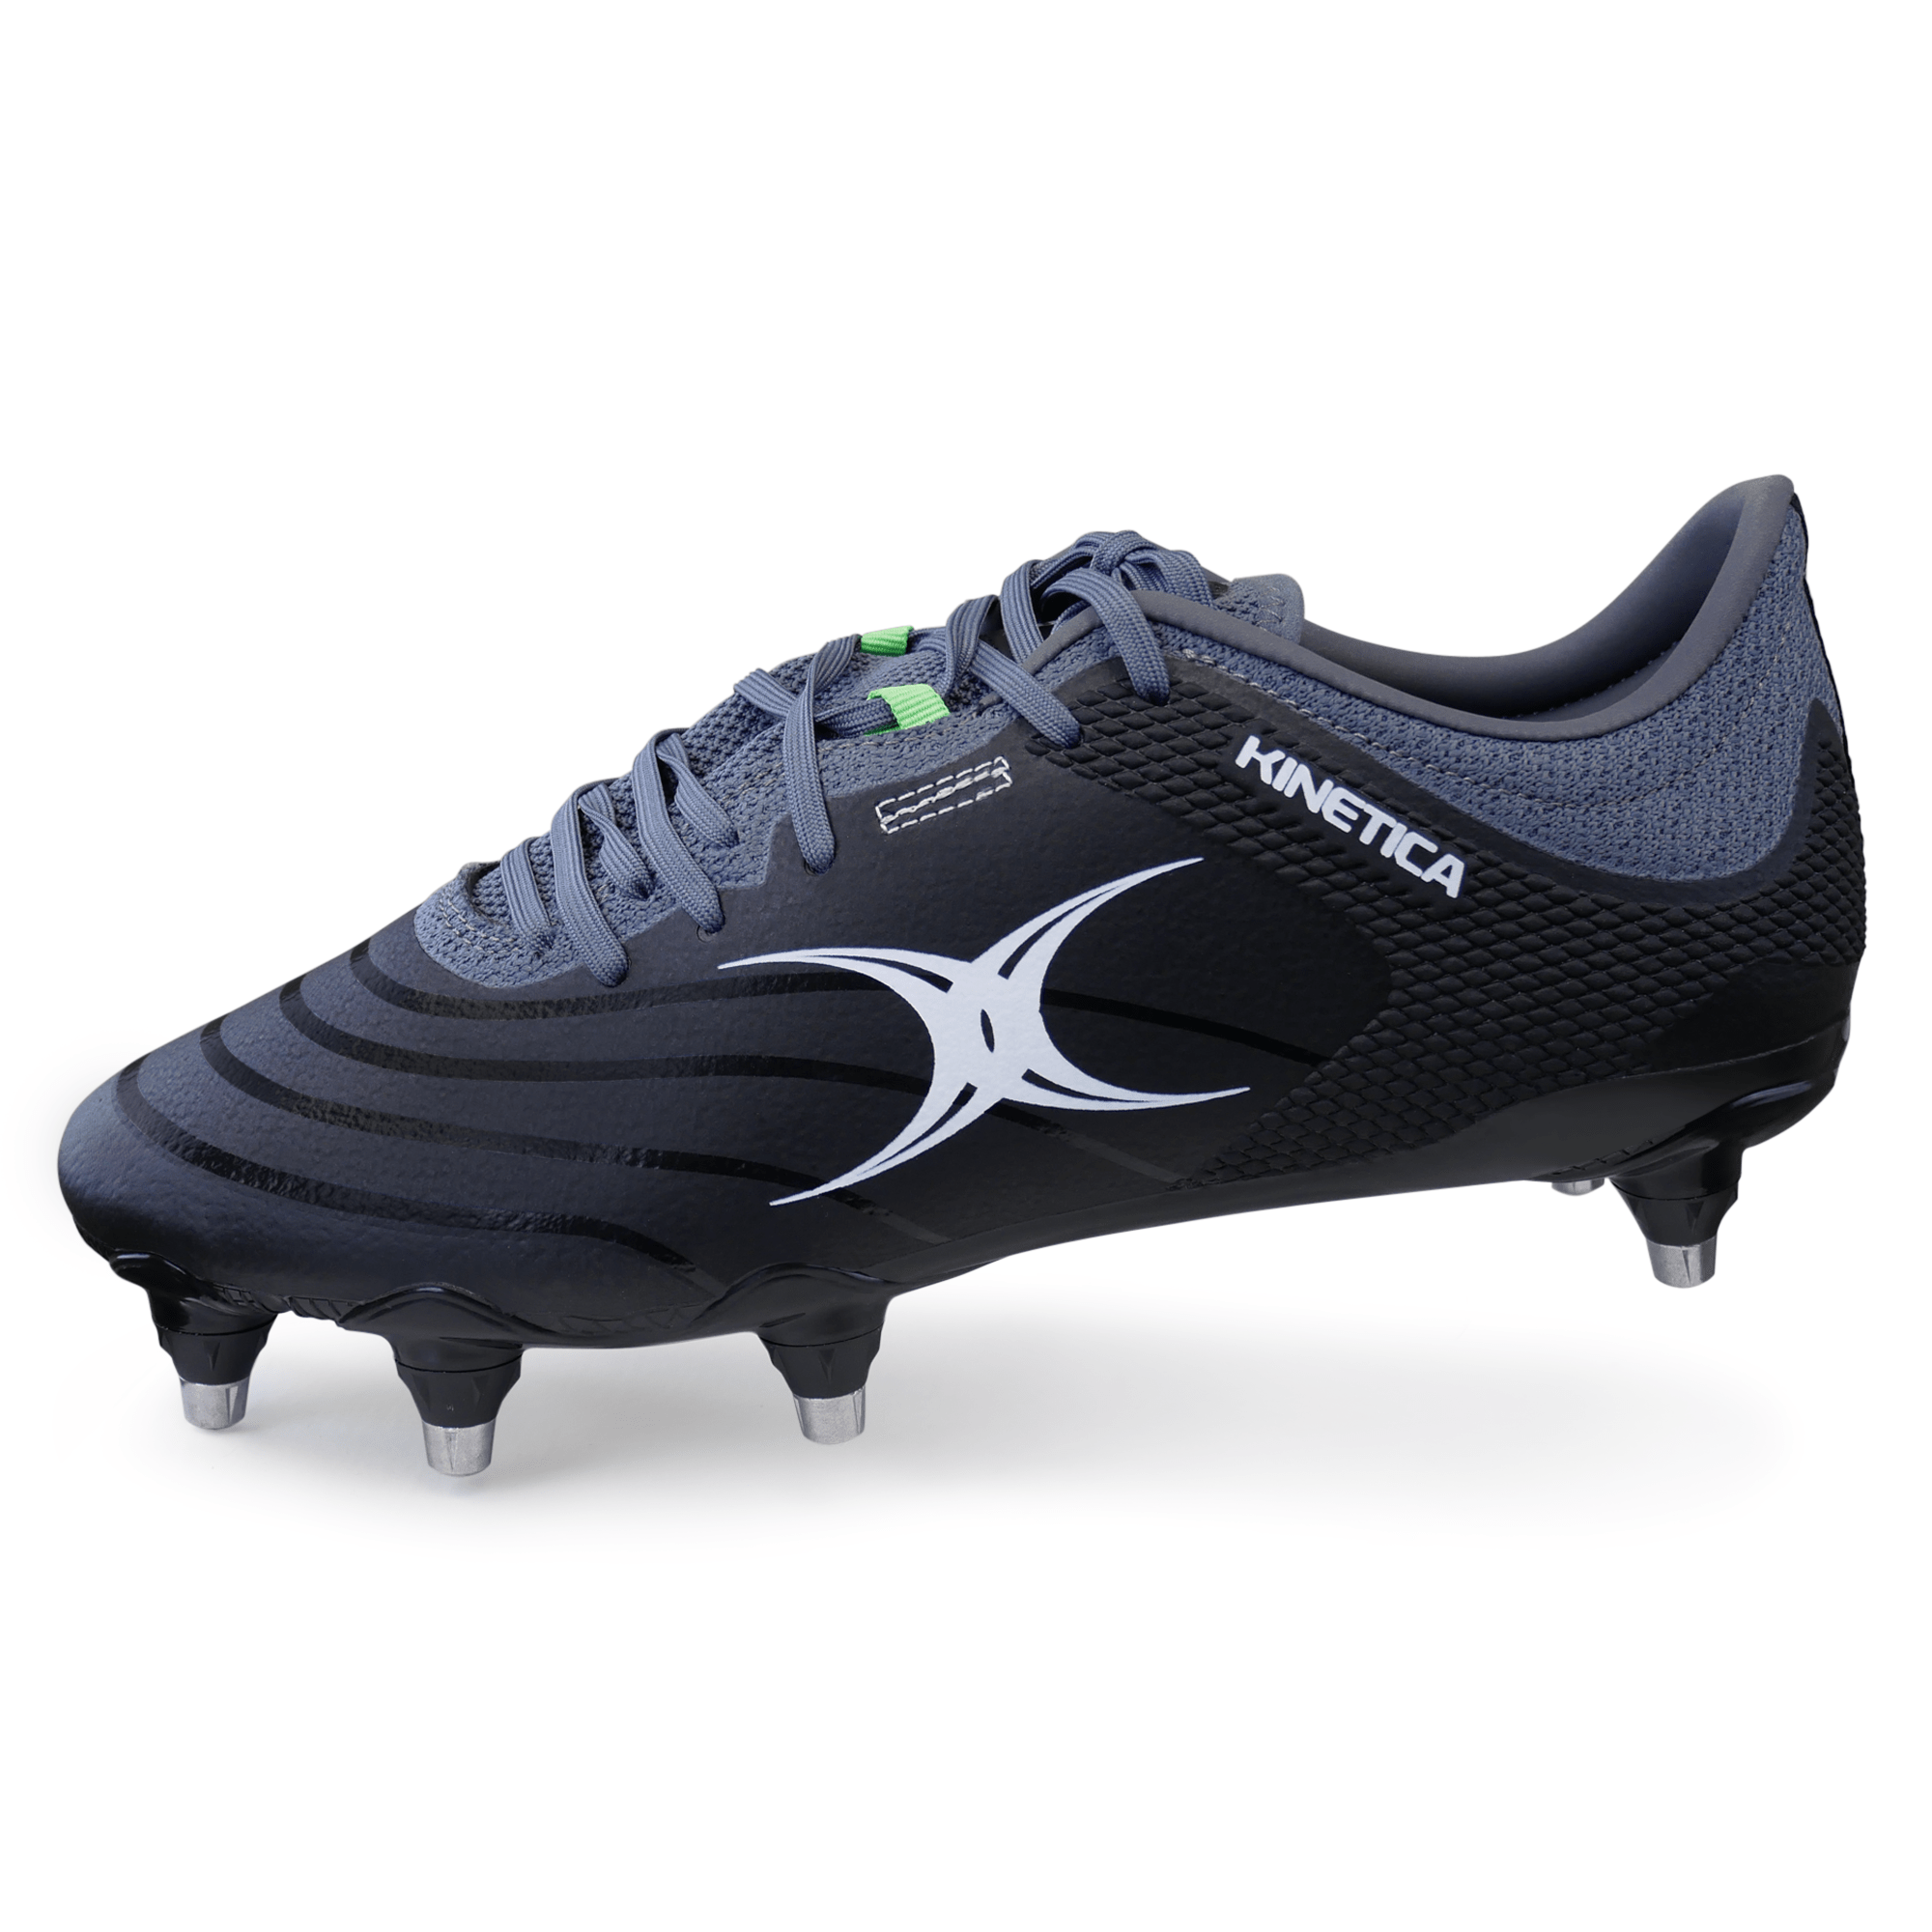 Gilbert Kinetica Pro Power Rugby Cleat - Soft Ground Boot - Black - SKU 87387340